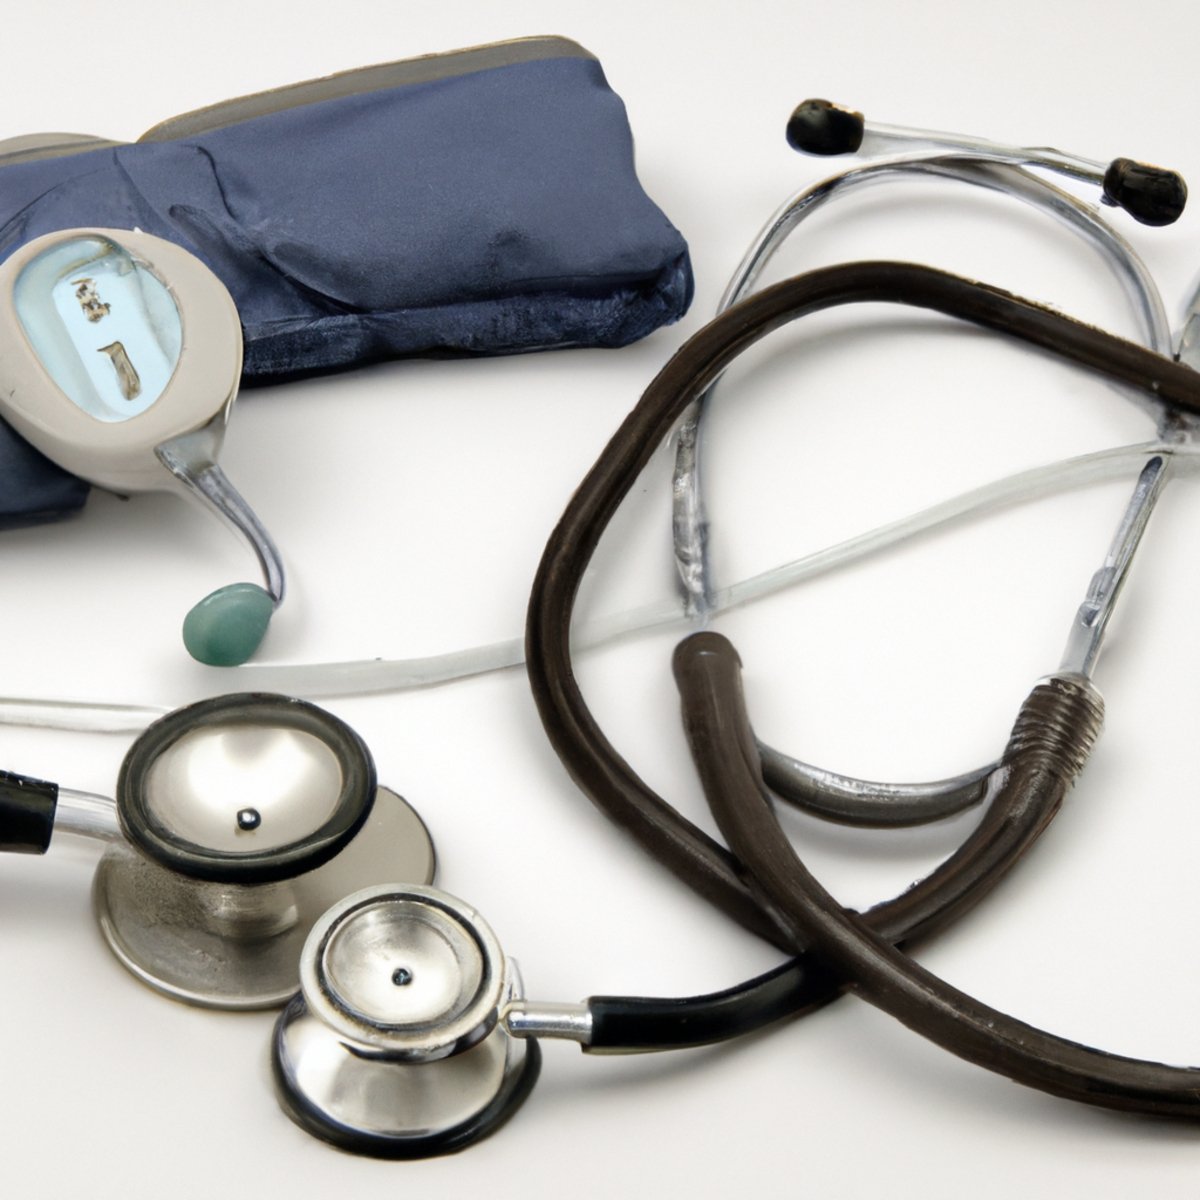 Symbolic representation of Alagille Syndrome challenges: stethoscope, textbook, and desk symbolize medical care, knowledge, and caregiver support.